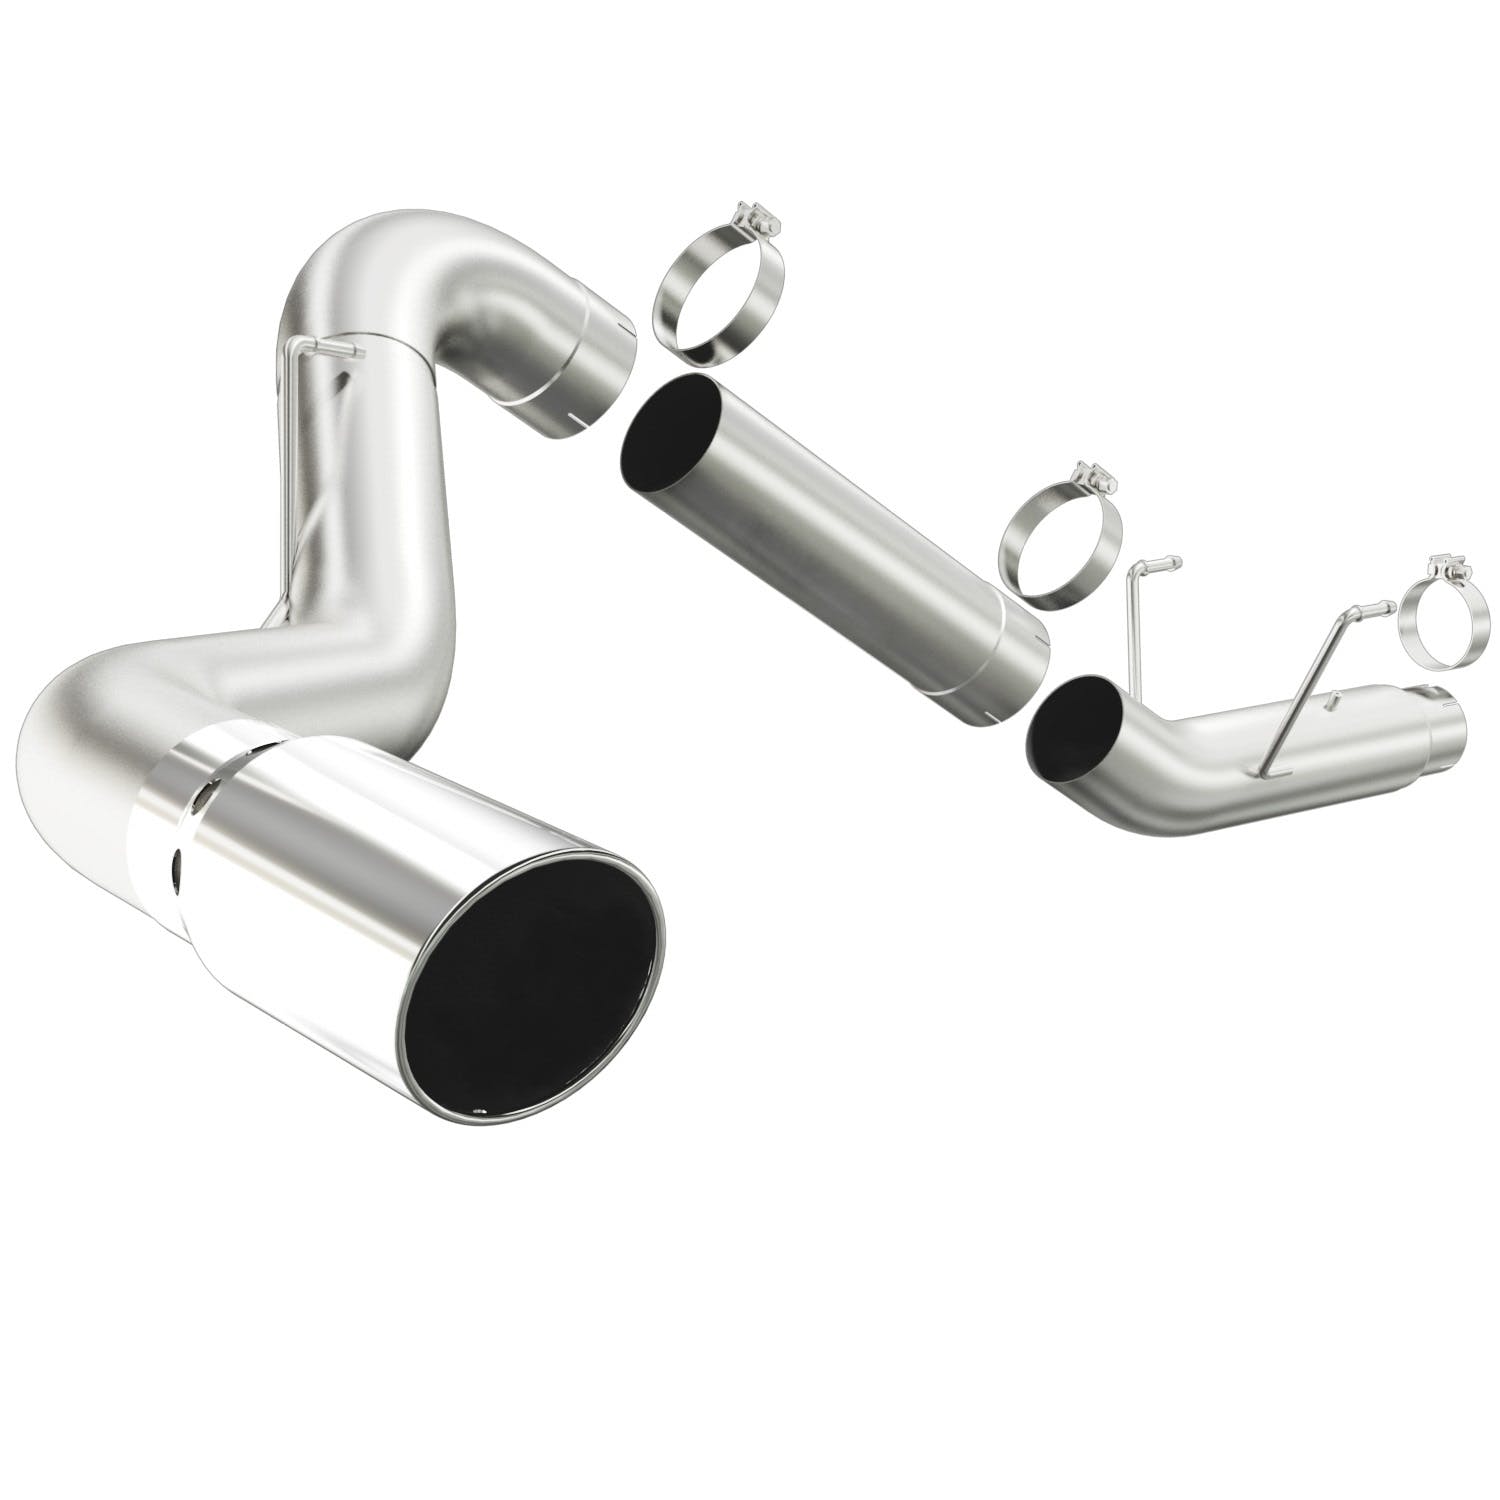 MagnaFlow Exhaust Products 17950 Pro Series Performance Diesel Exhaust System